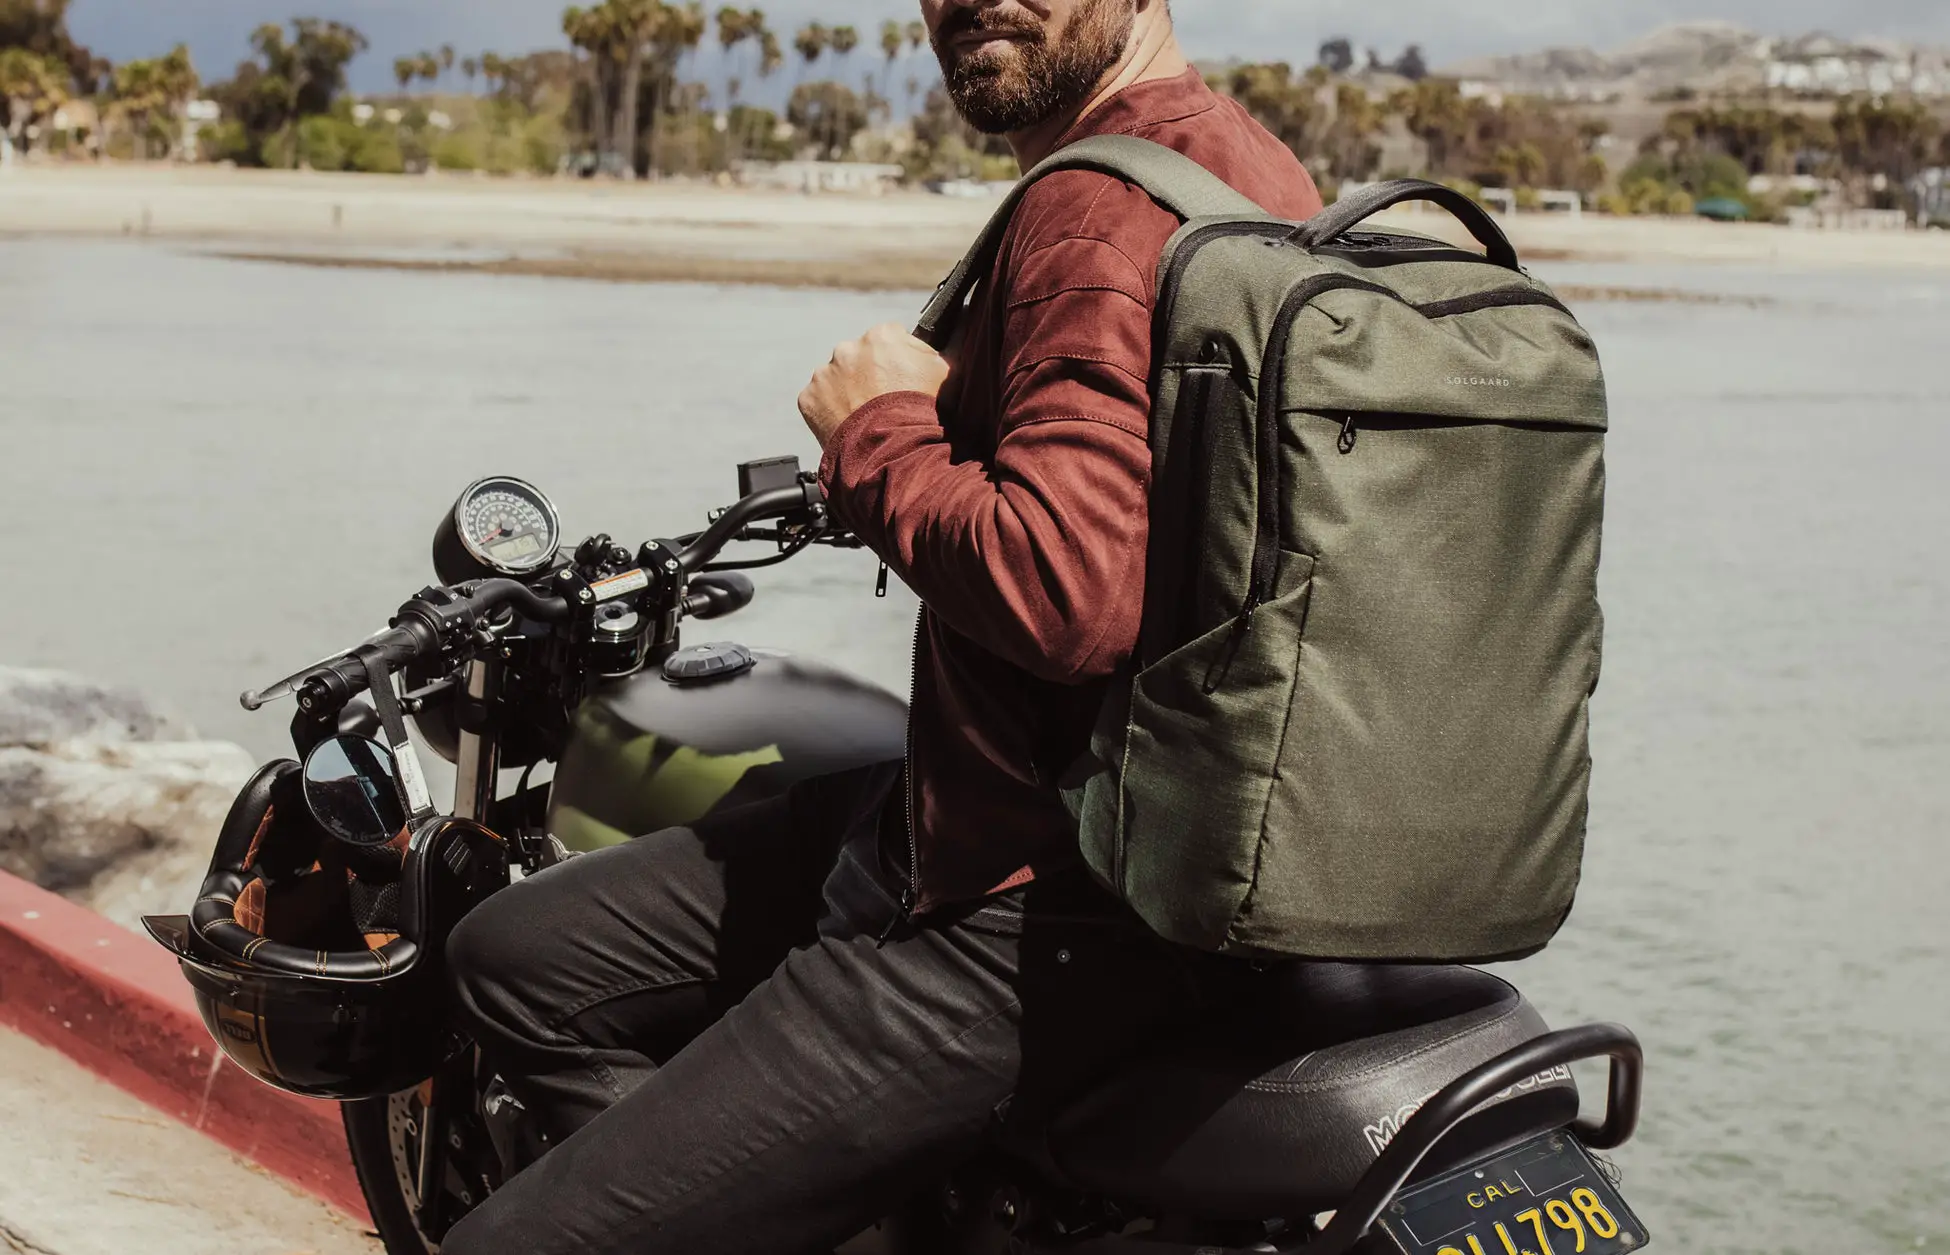 Solgaard Lifepack Endeavor - a Backpack with Closet